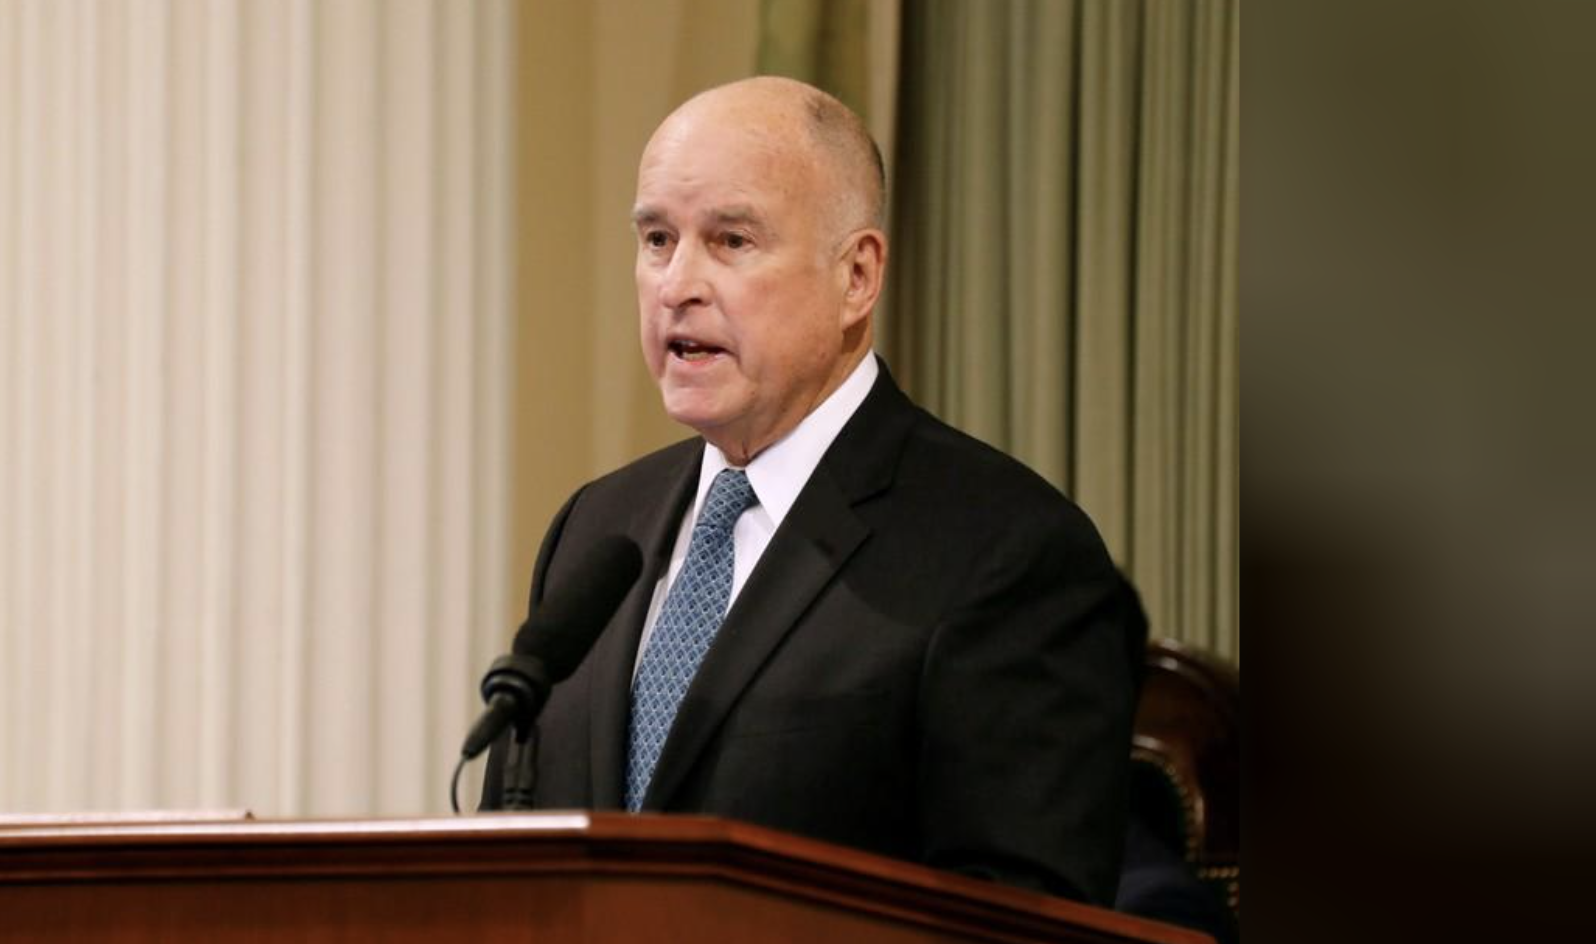 Group close to pope urges California's Brown to commute all death sentences